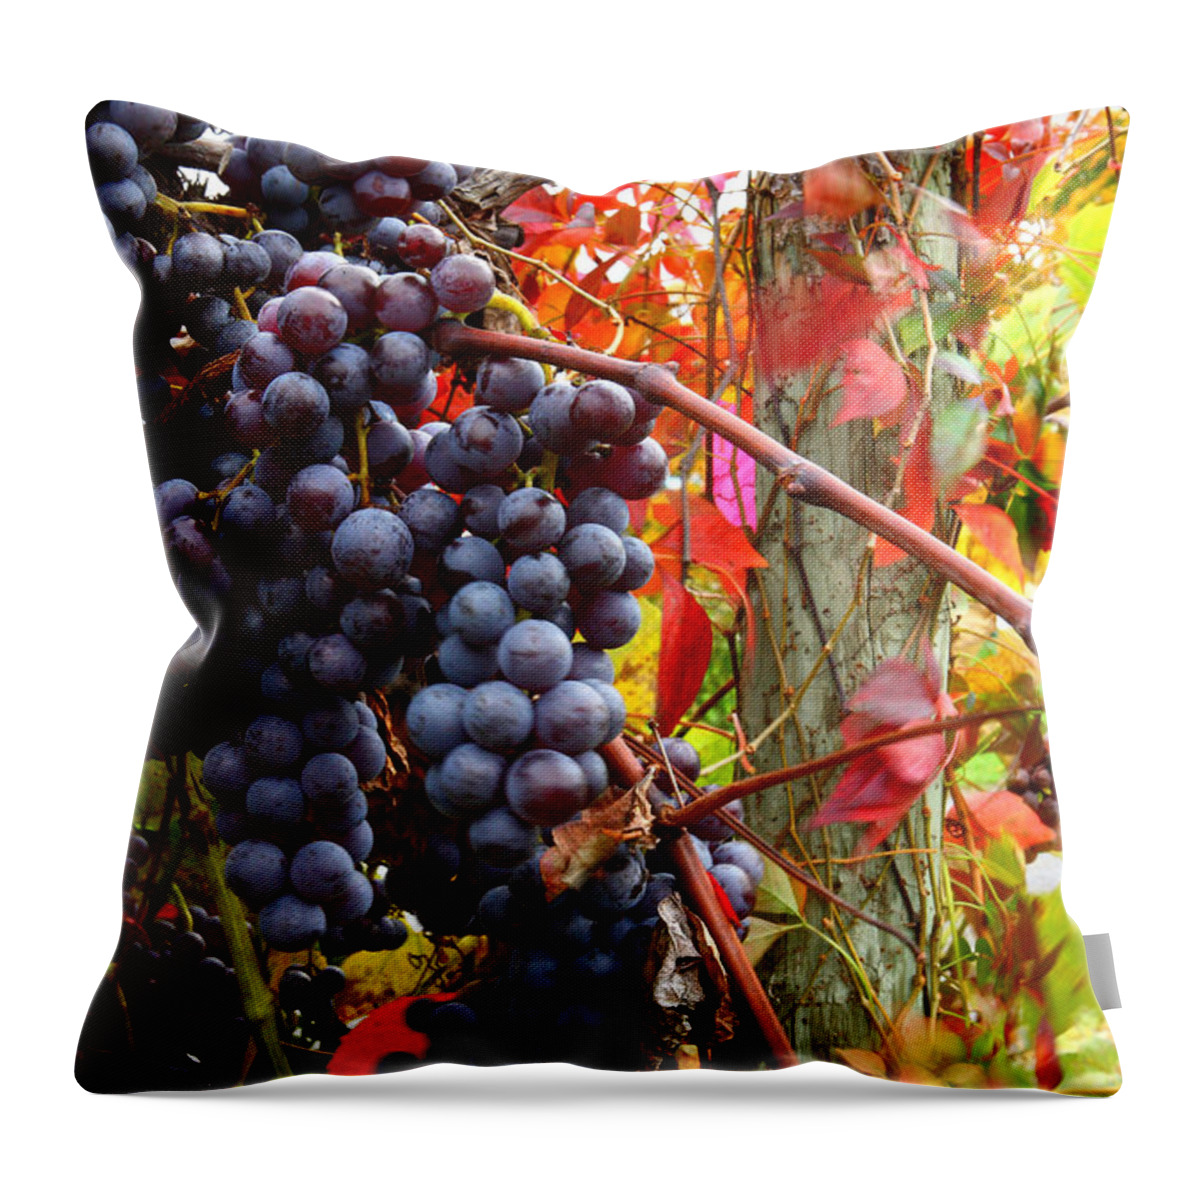 Grapes Throw Pillow featuring the photograph Vines Of October by Roger Bailey